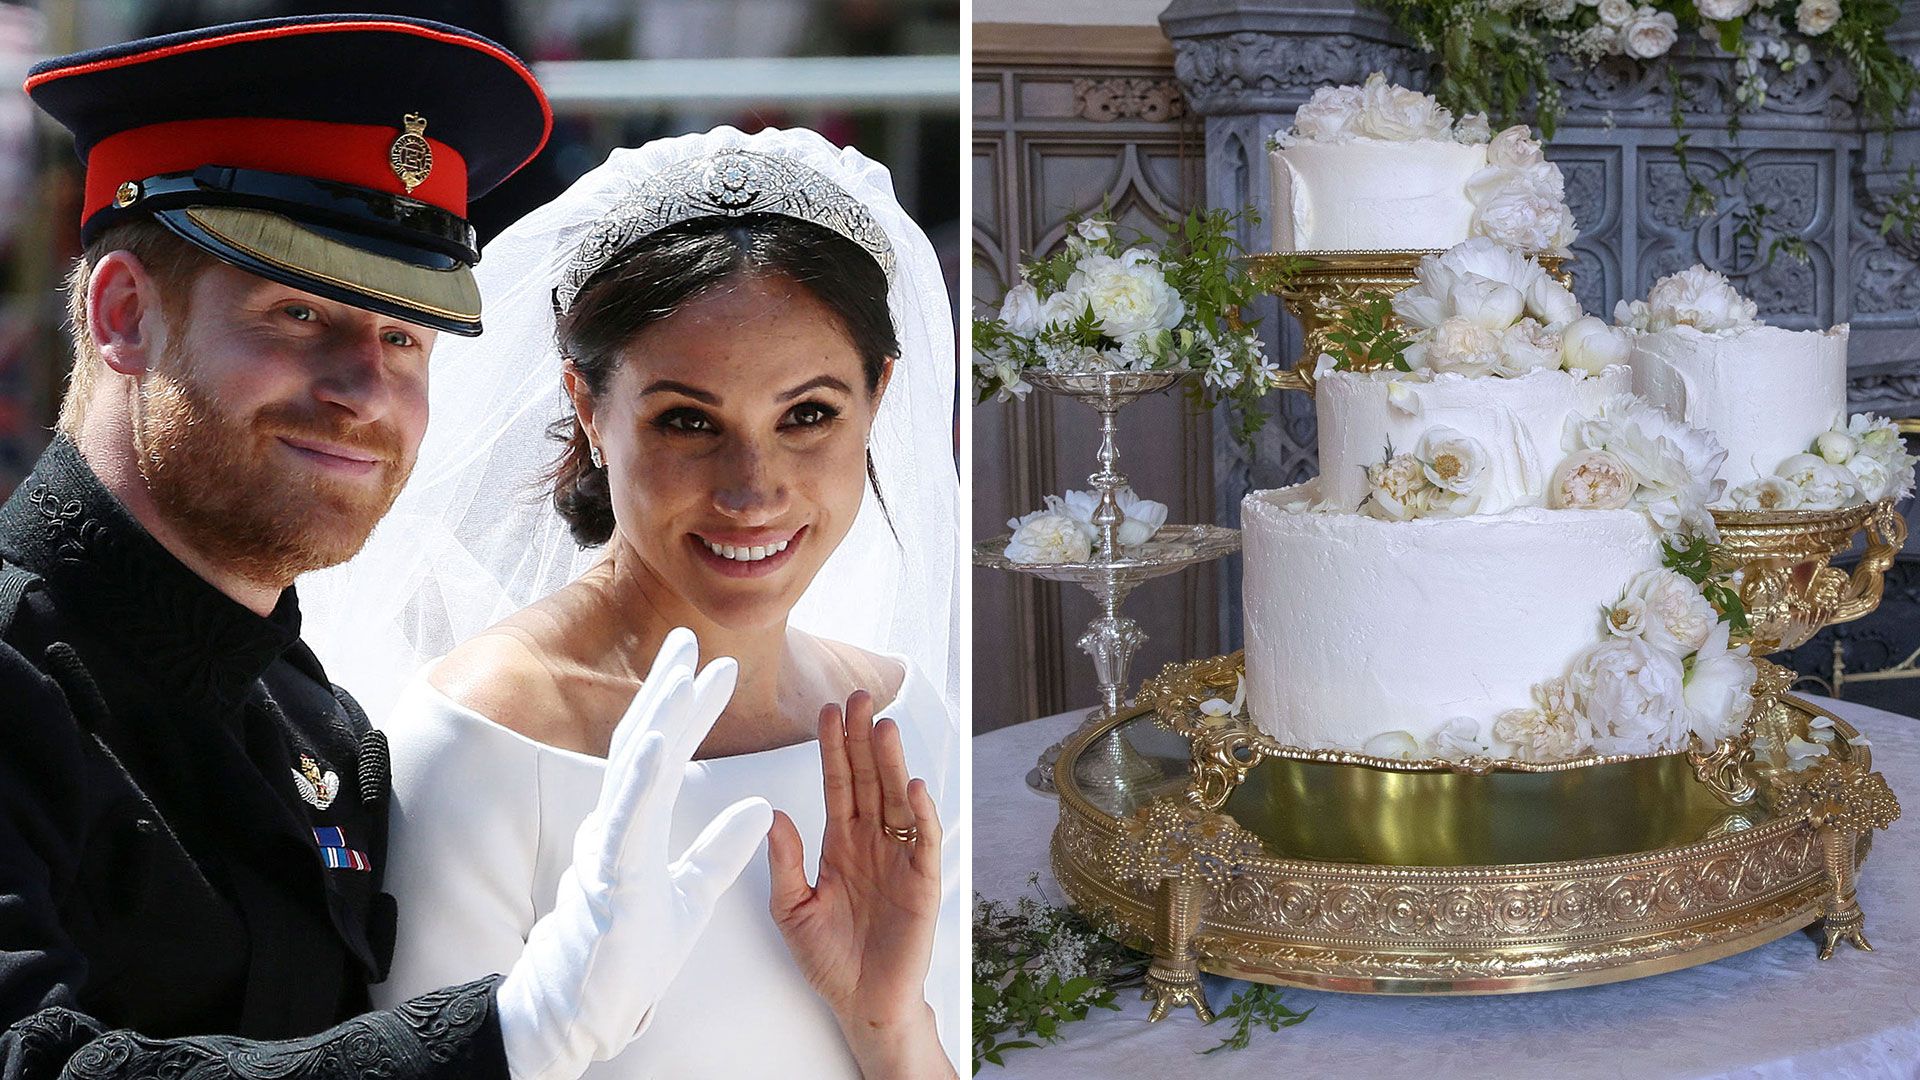 Meghan Markle's stunning four-piece floral wedding cake was extra sentimental